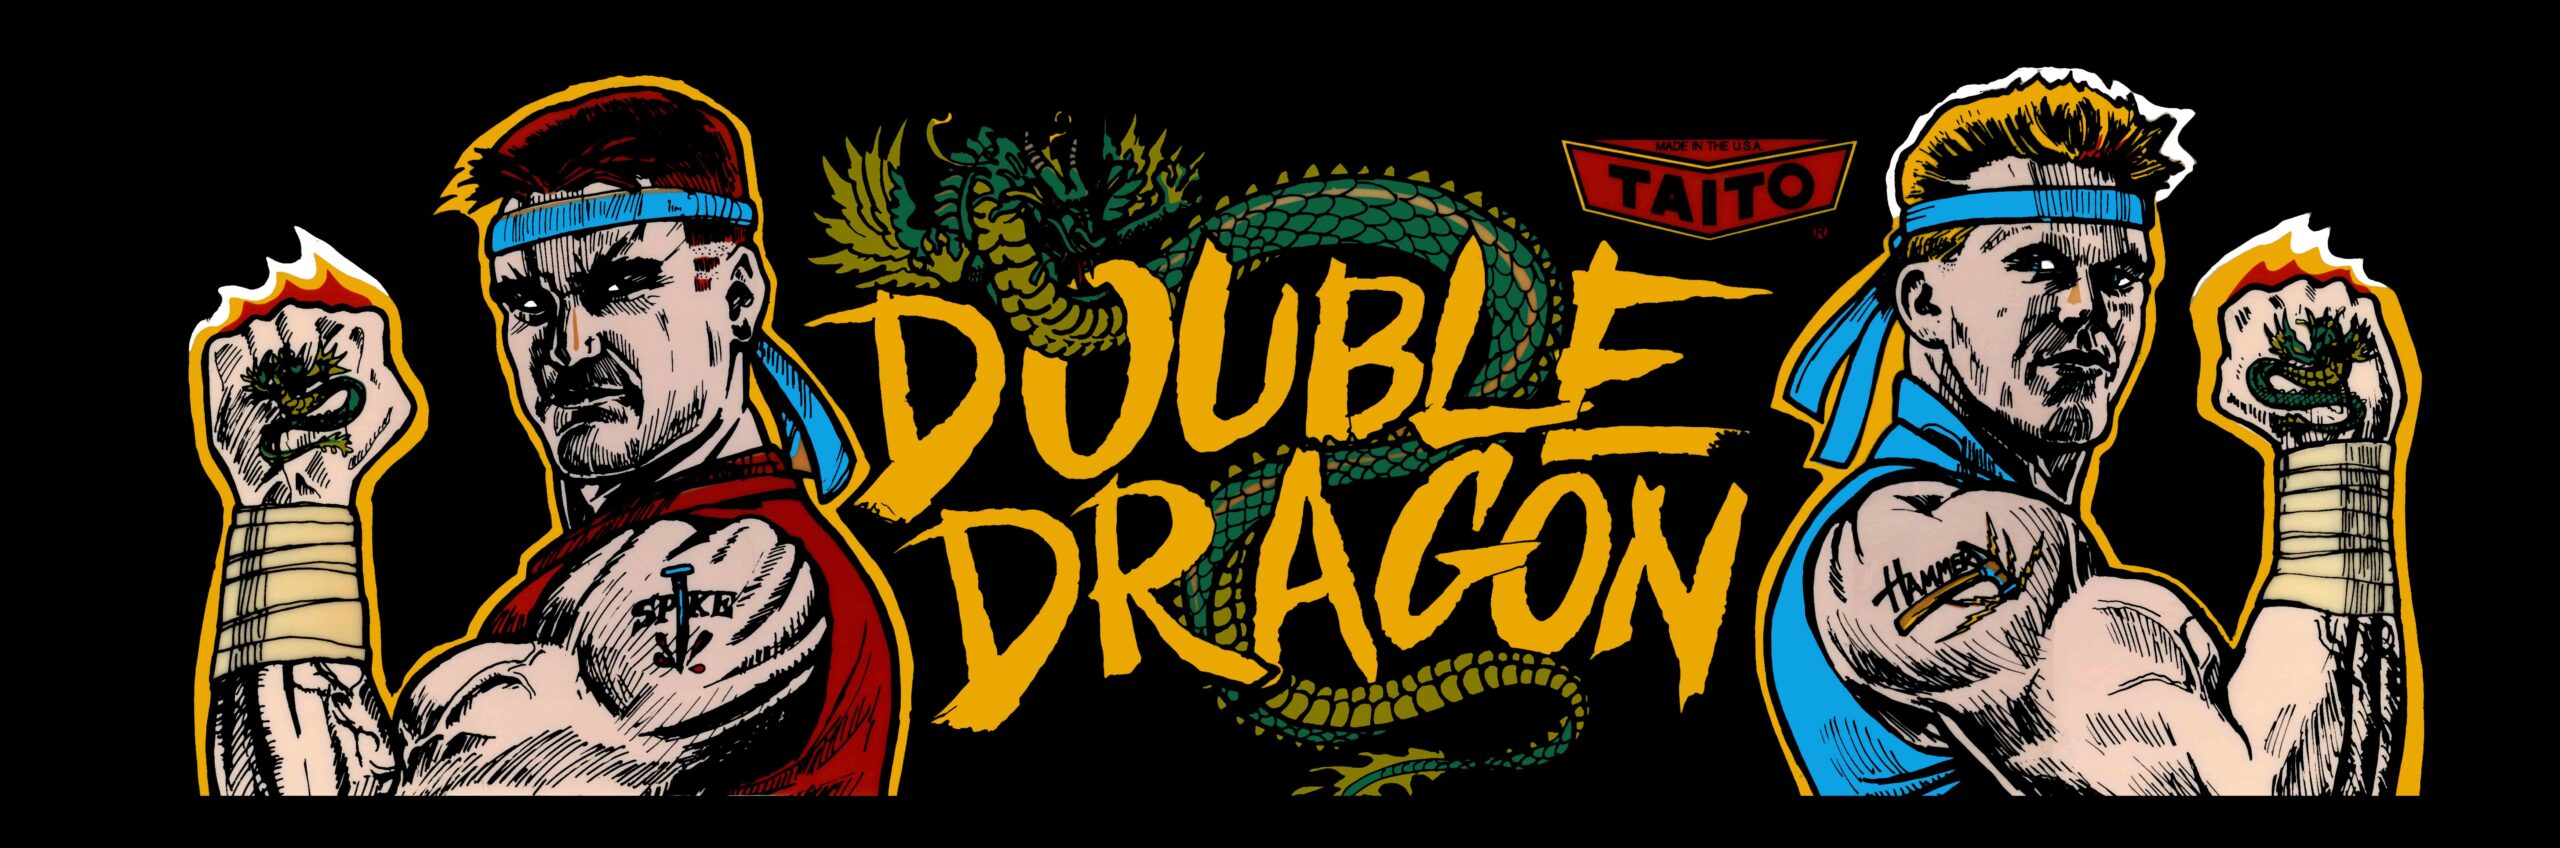 double-dragon-arcade-the-game-hoard